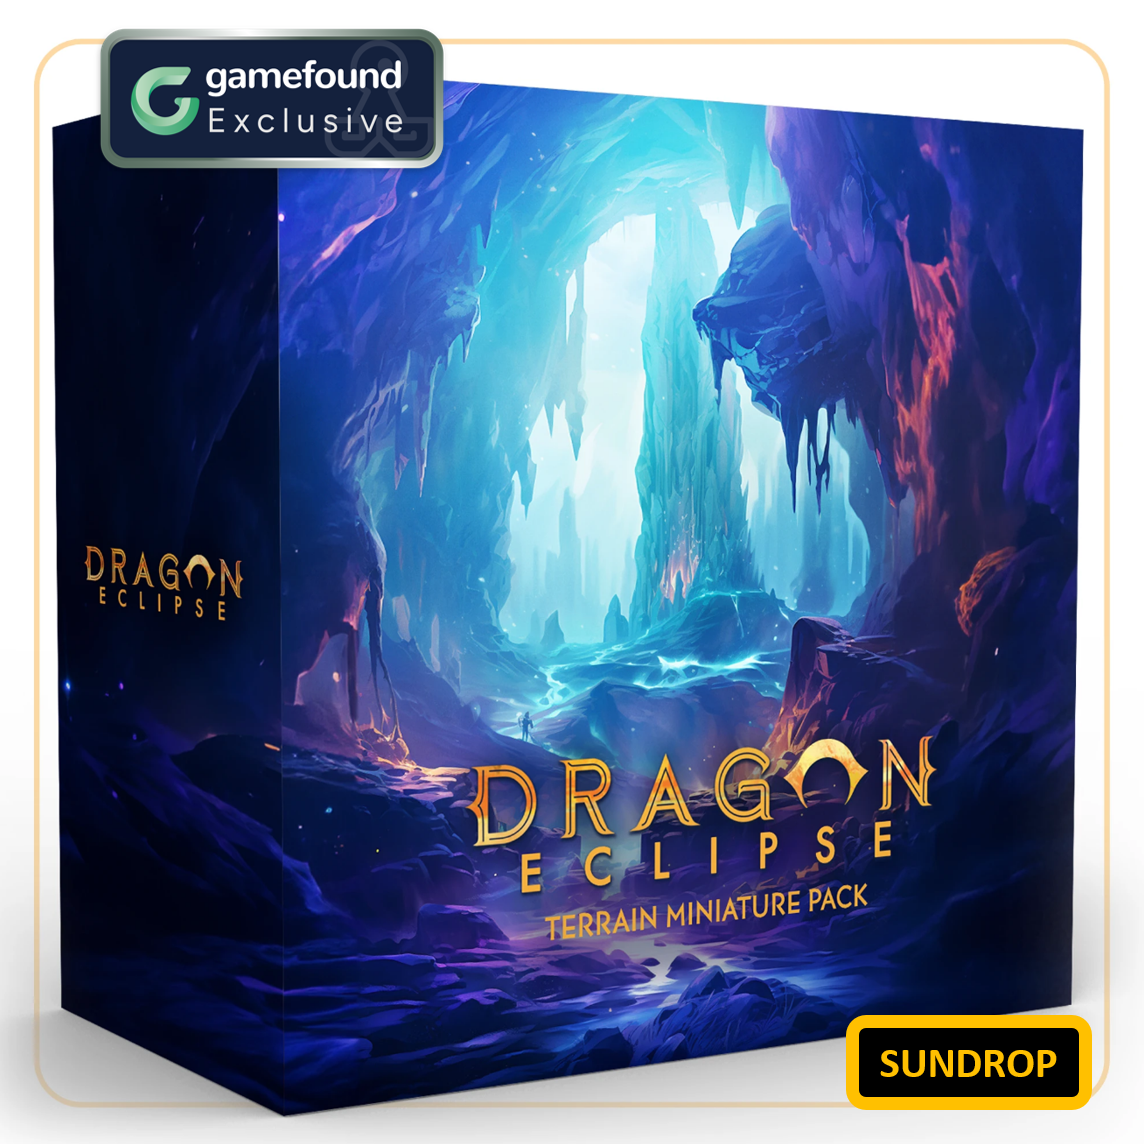 Gamefound Exclusive Dragon Eclipse Board Game Terrain Miniature Pack Expansion, Sundrop Edition